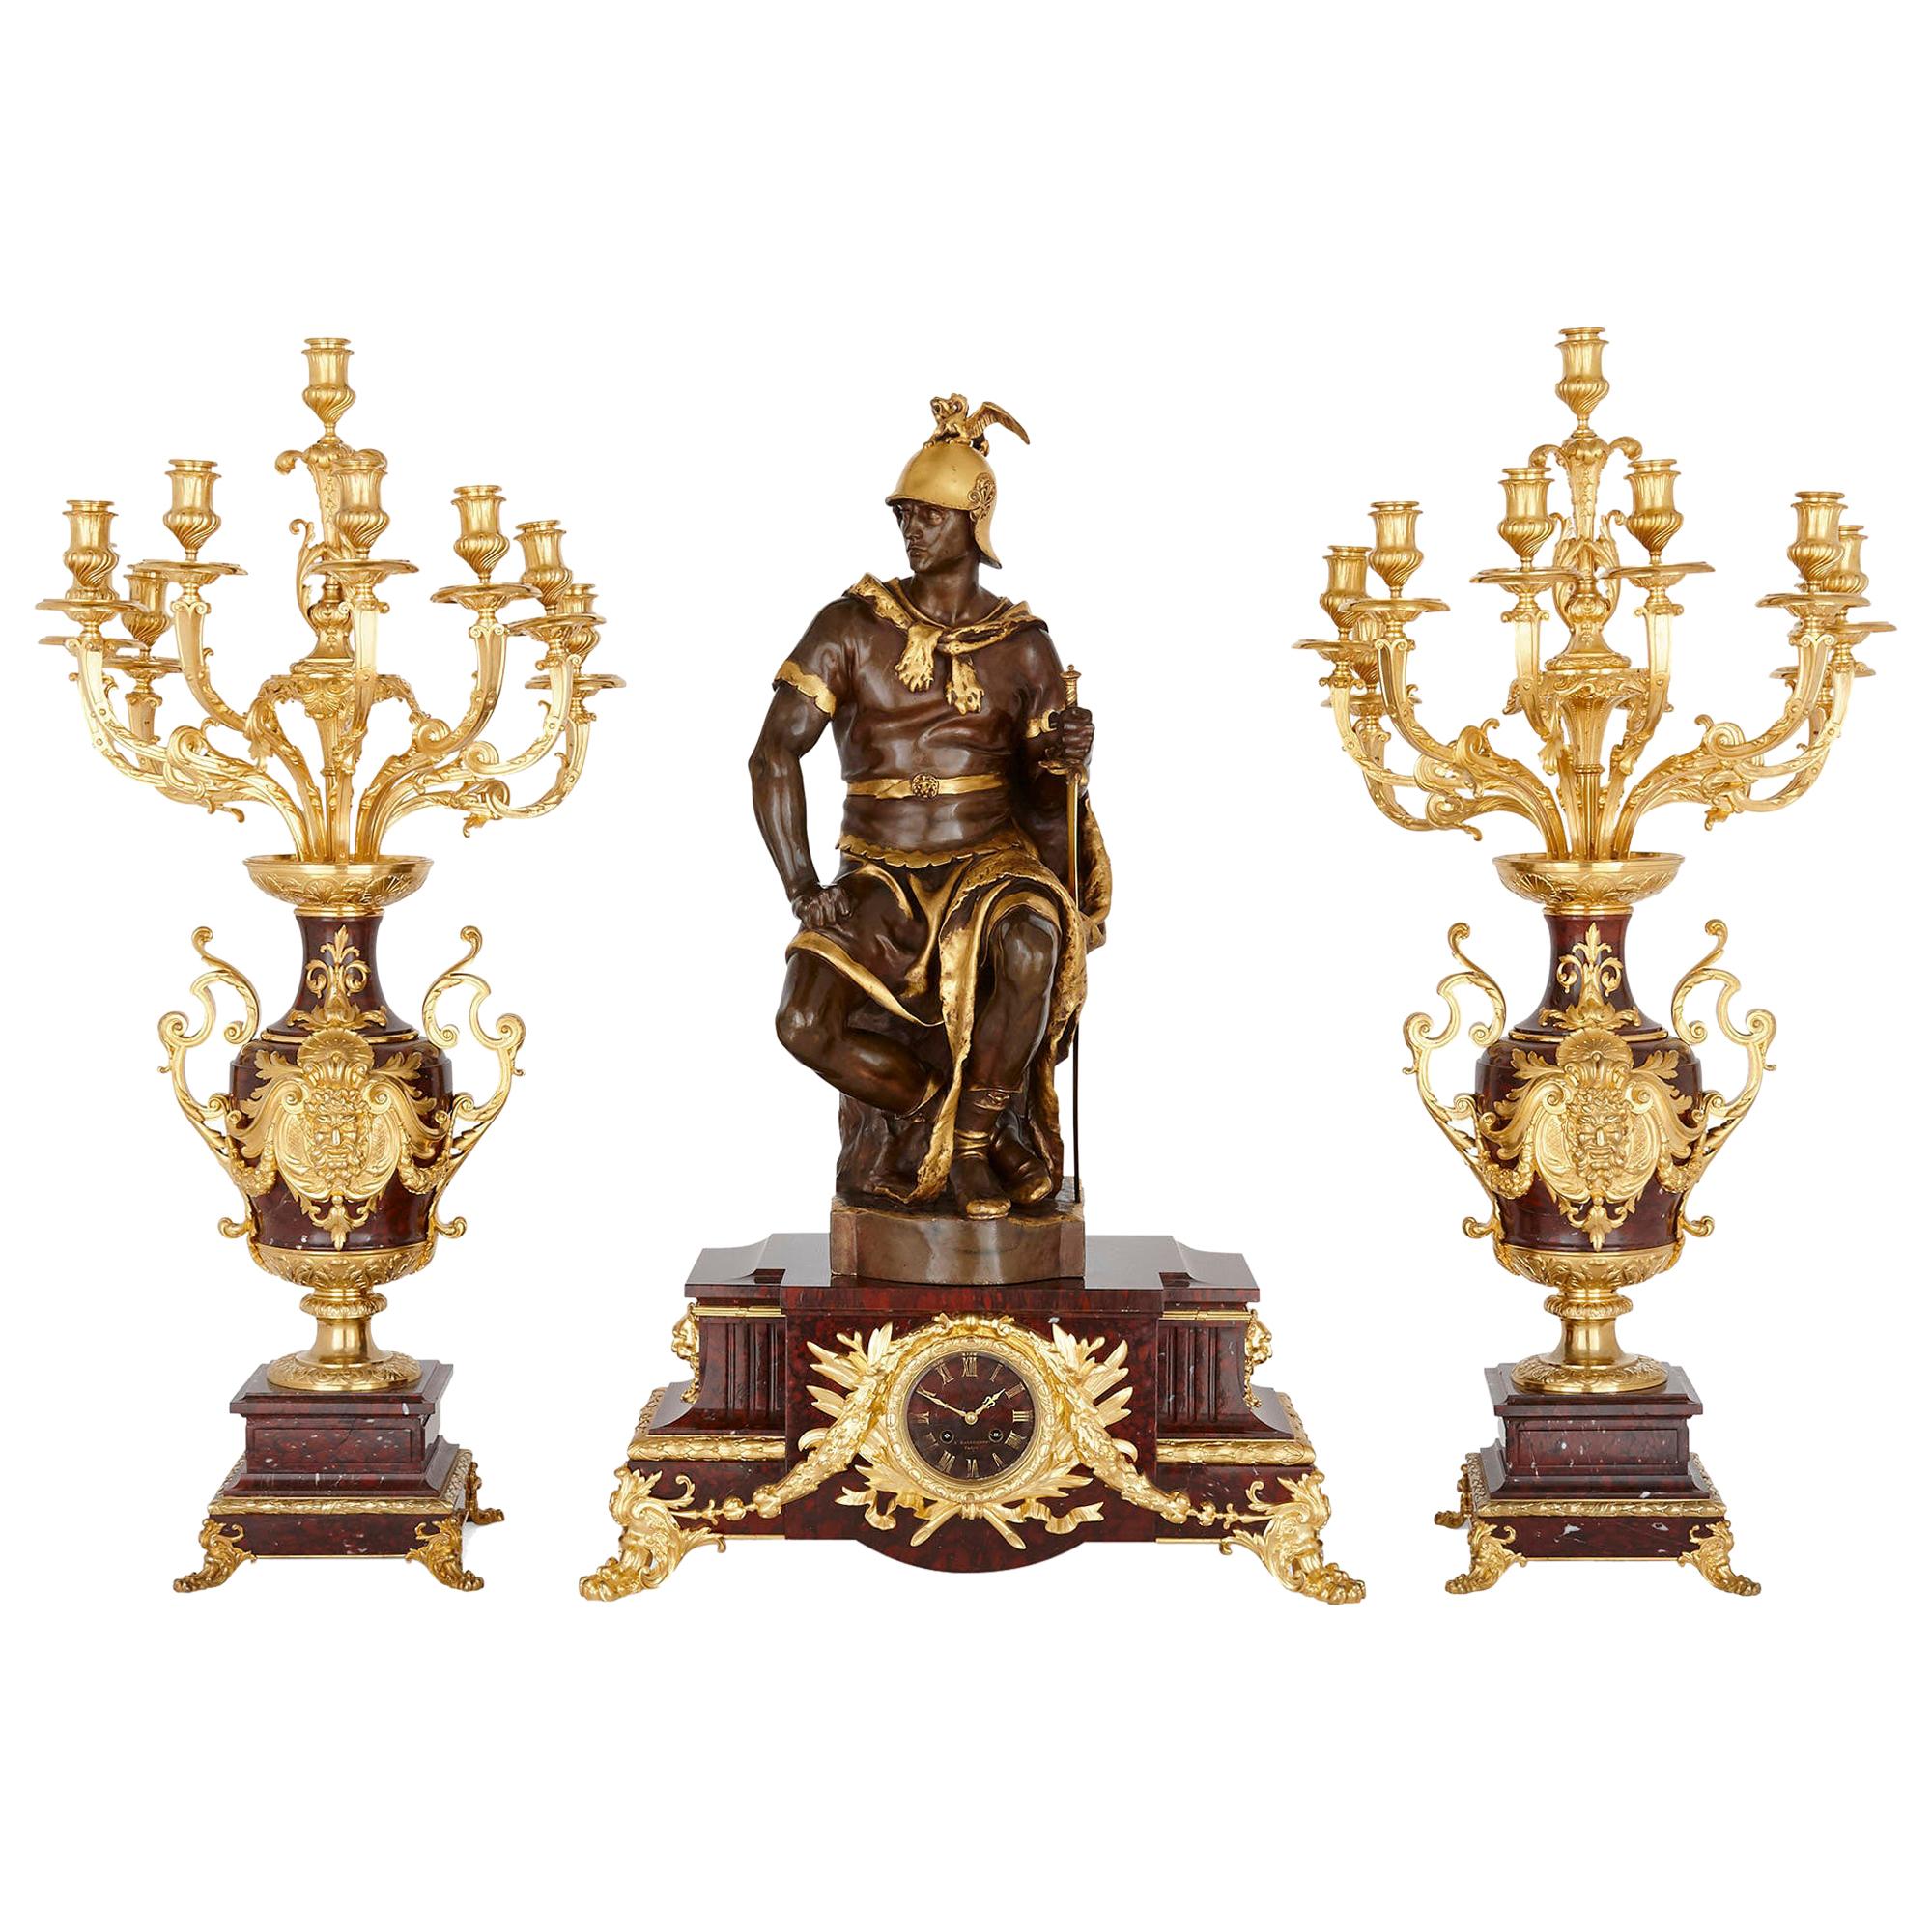 Marble, Gilt, and Patinated Bronze Three-Piece Clock Set by Barbedienne